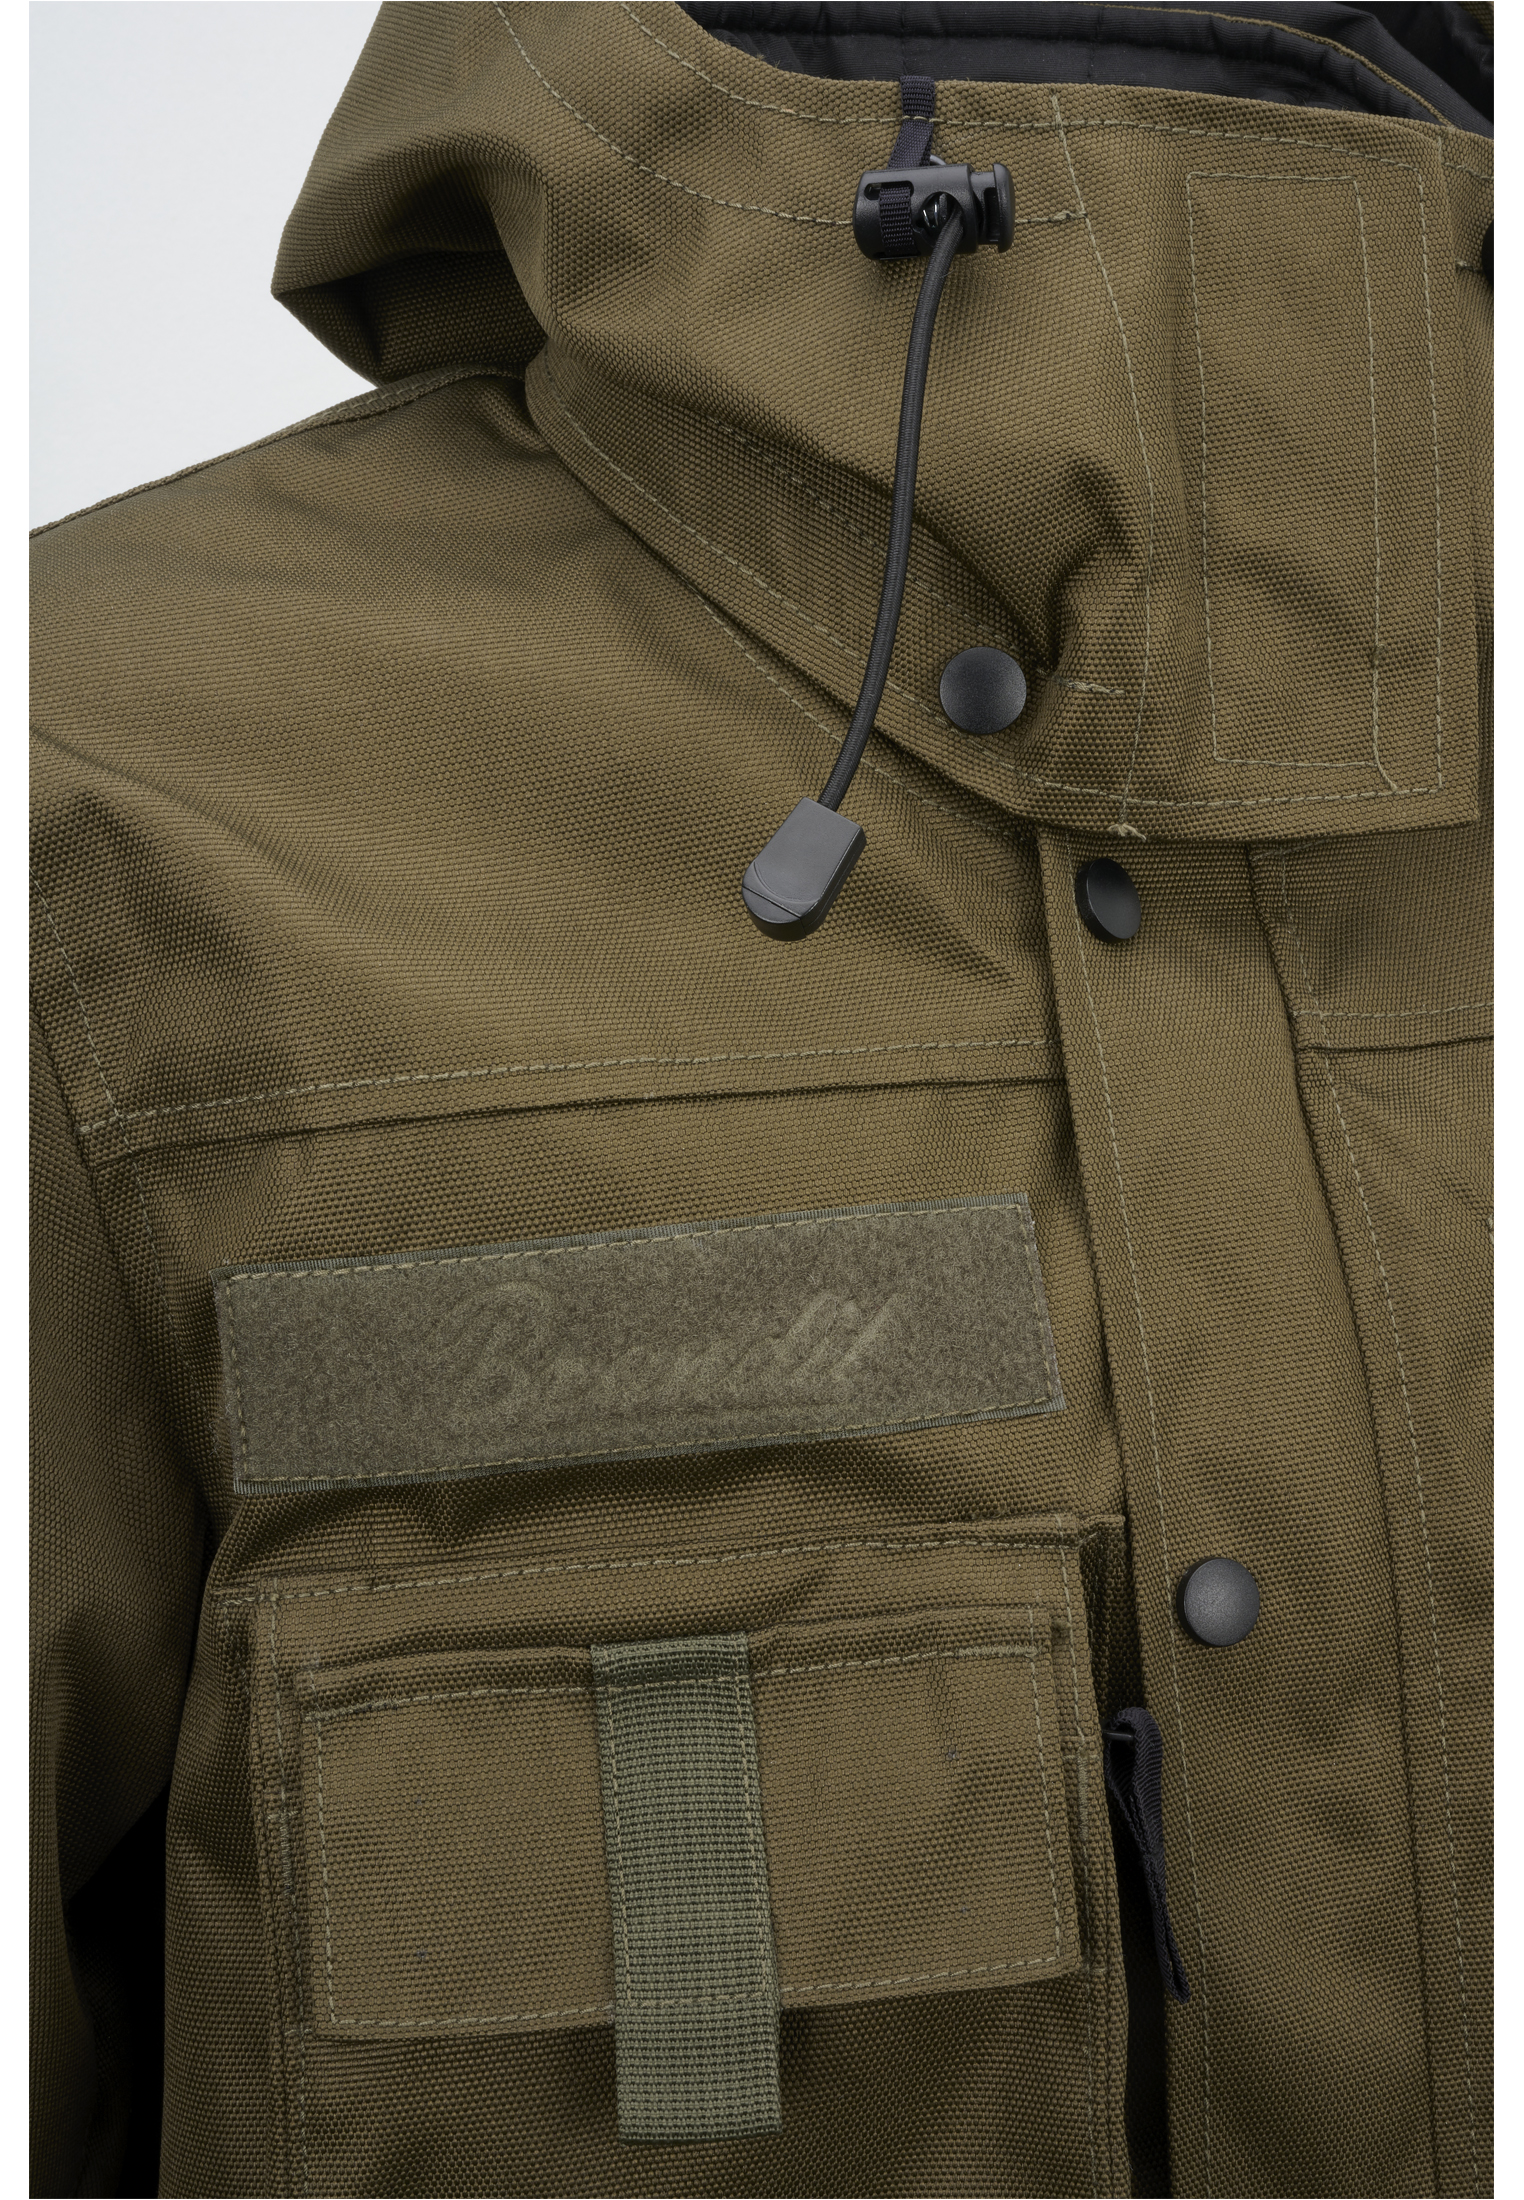 Jacken Performance Outdoorjacket in Farbe olive